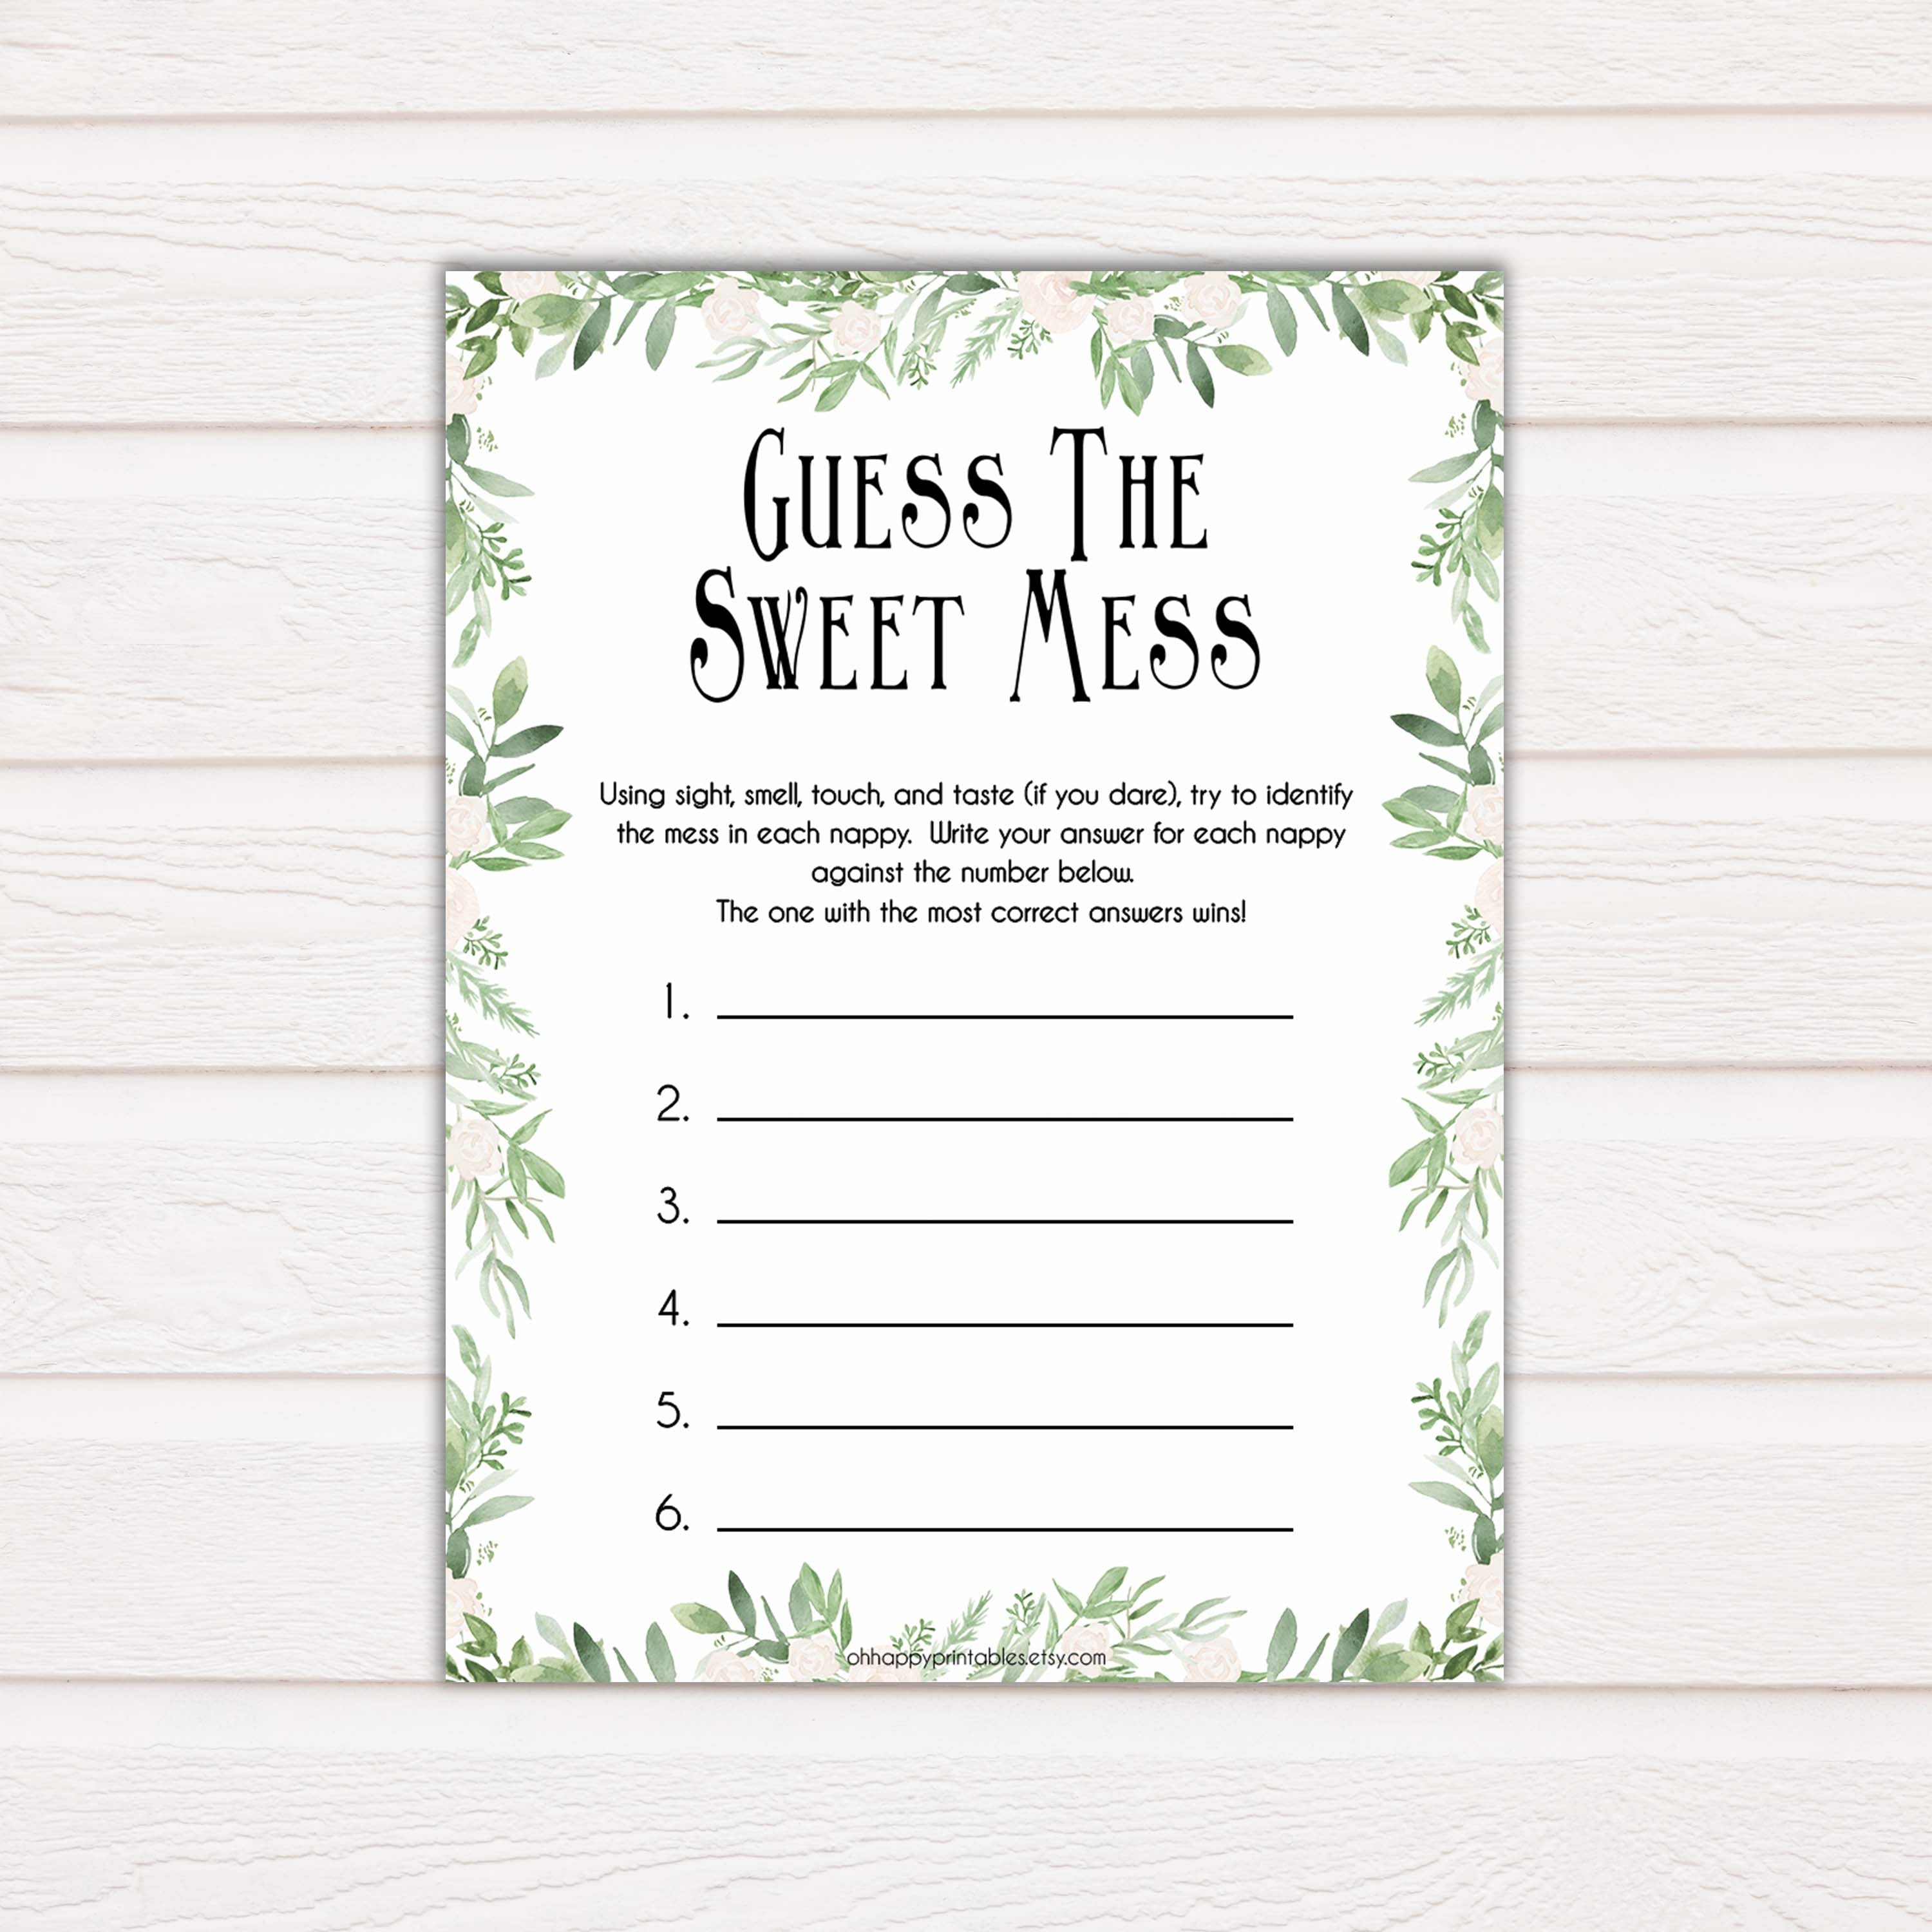 reenery Baby Shower Guess The Mess Game, Bontanical Baby Shower Guess The Sweet Mess, Baby Shower Games, Guess The Mess, Baby Games, printable baby shower games, fun baby shower games, popular baby shower games